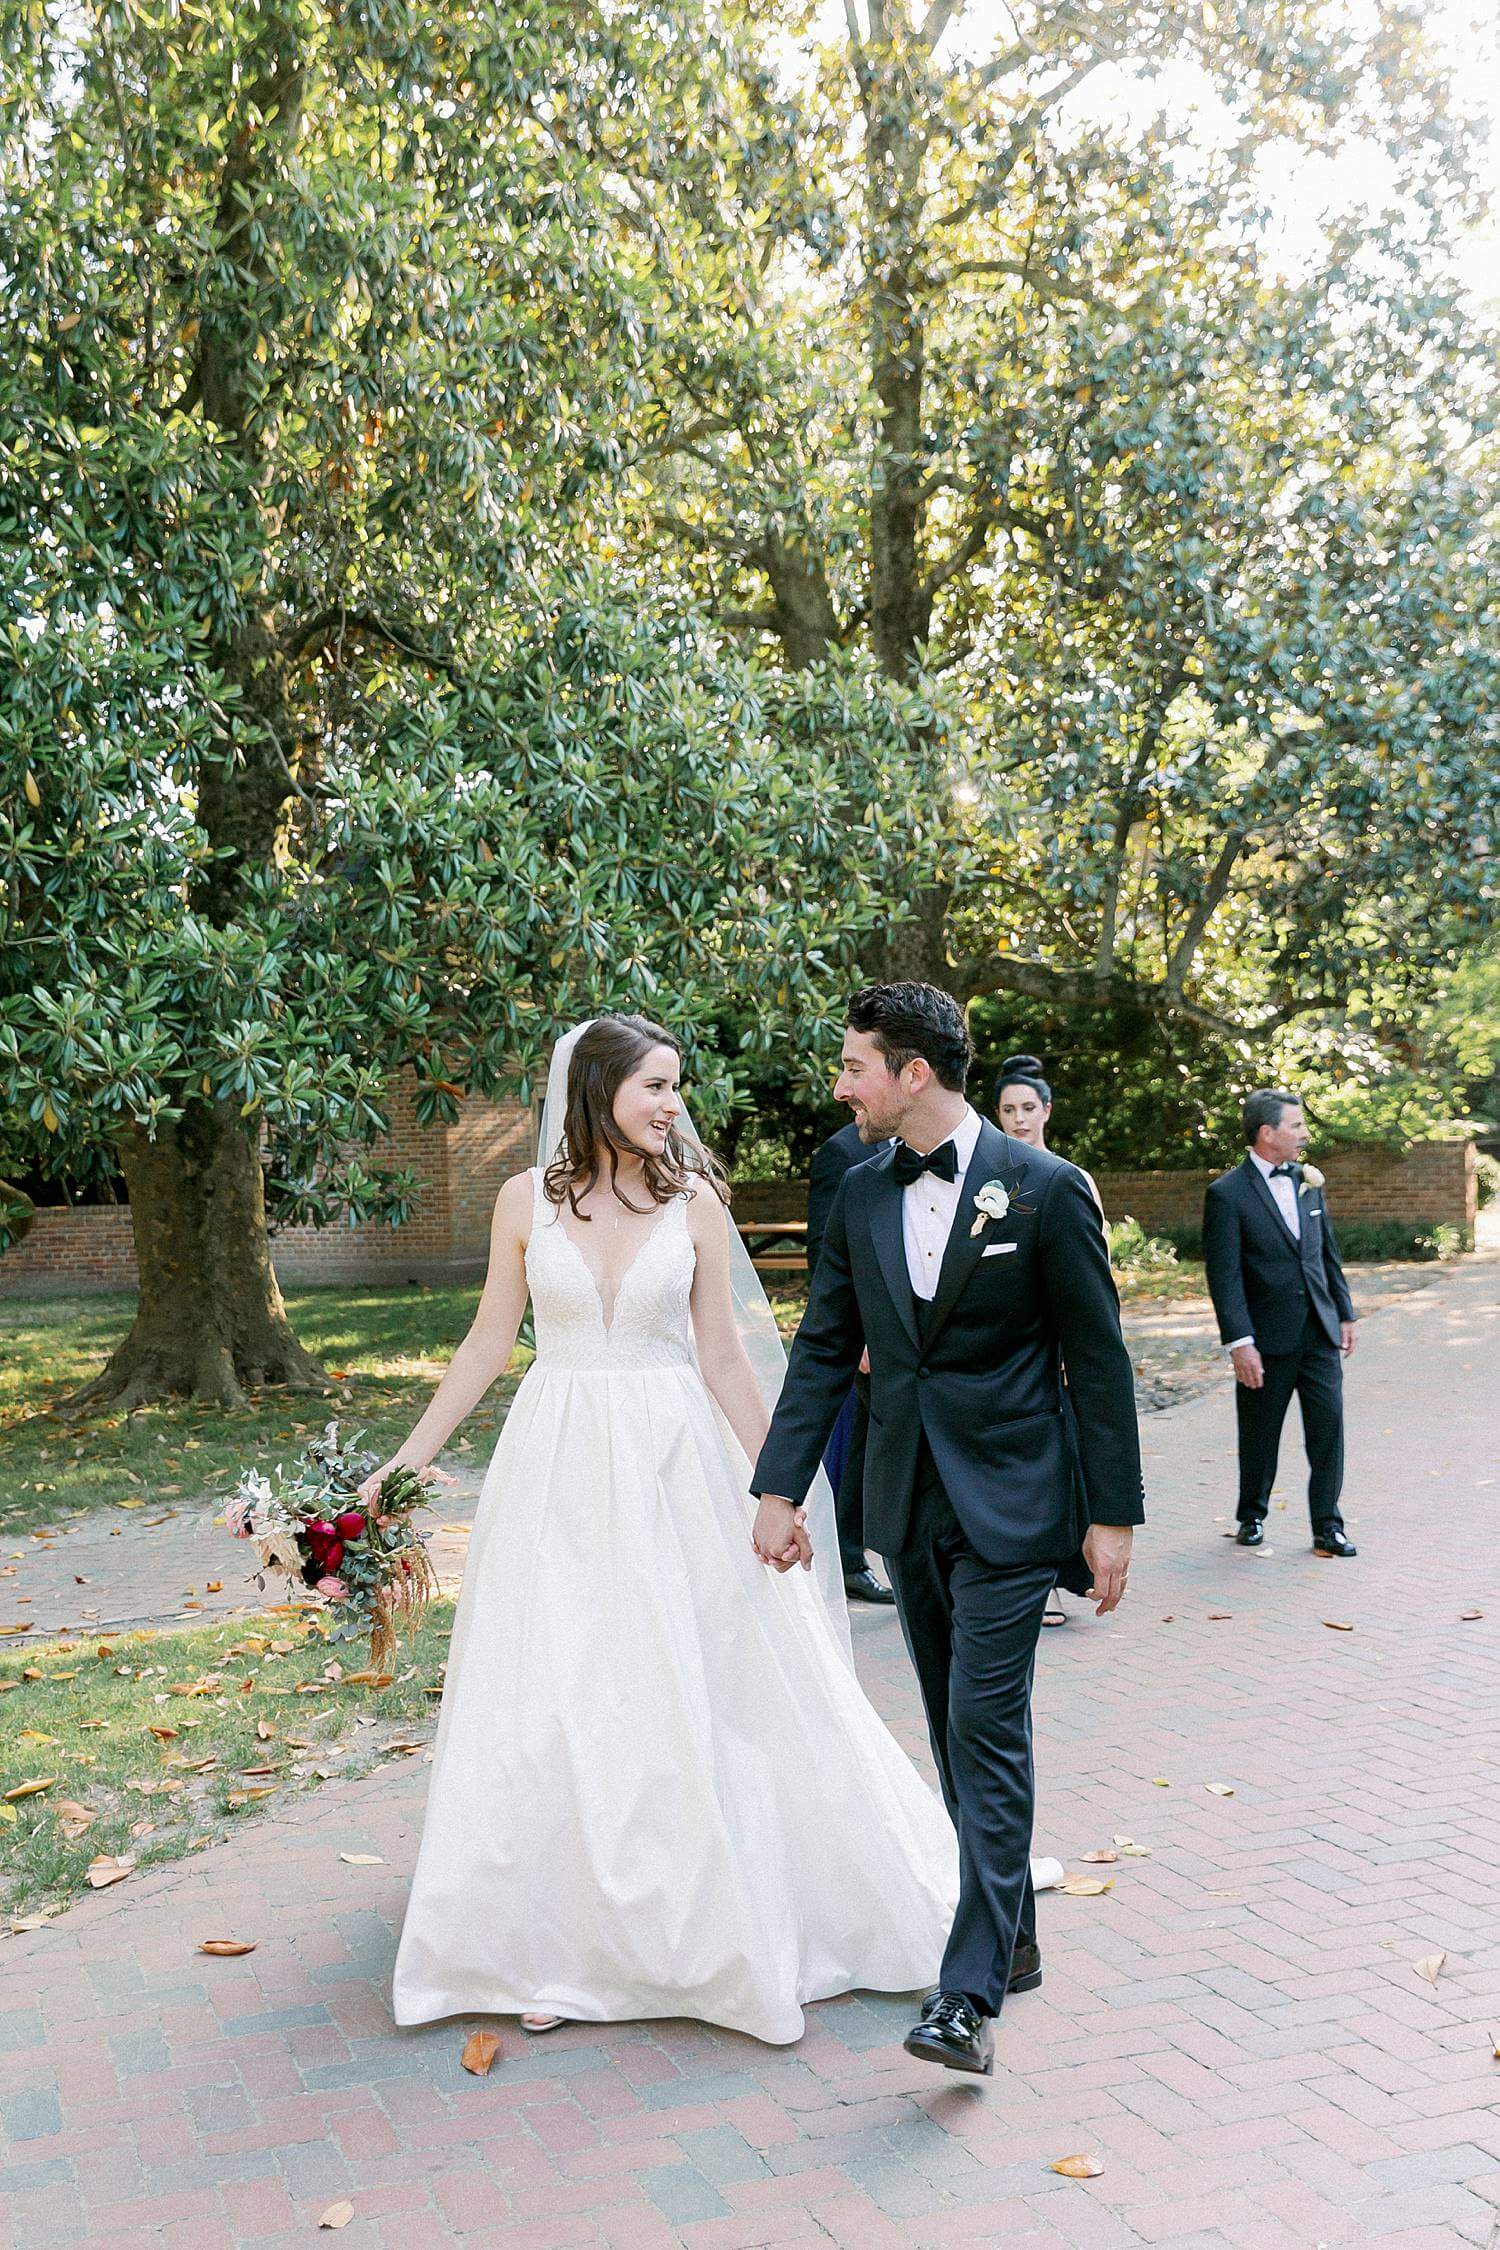 Bride and groom walking together at The Williamsburg Inn